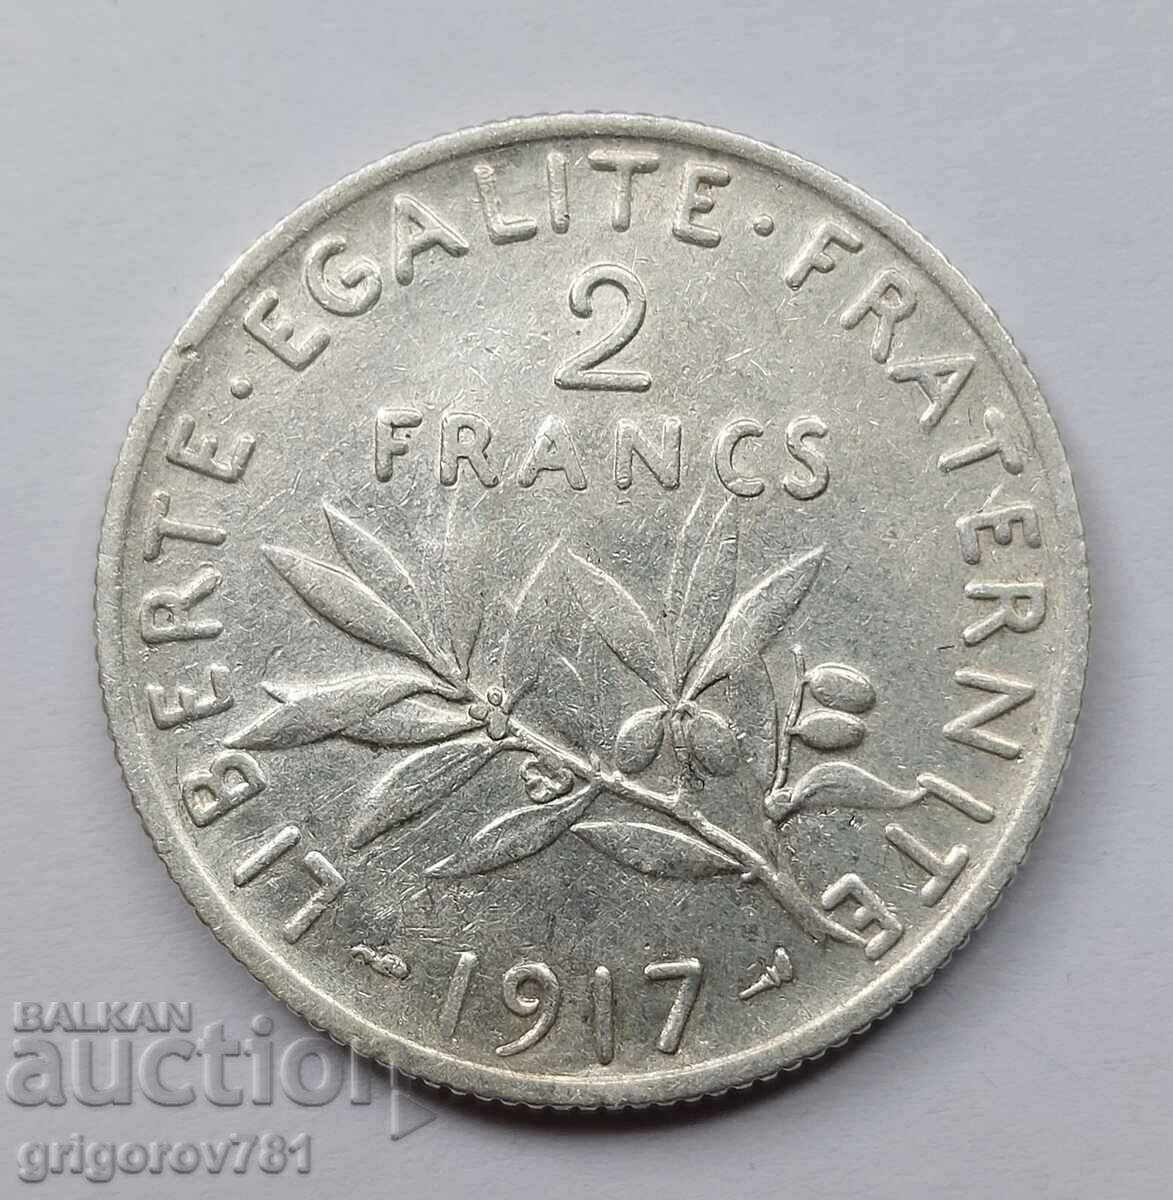 2 Francs Silver France 1917 - Silver Coin #130